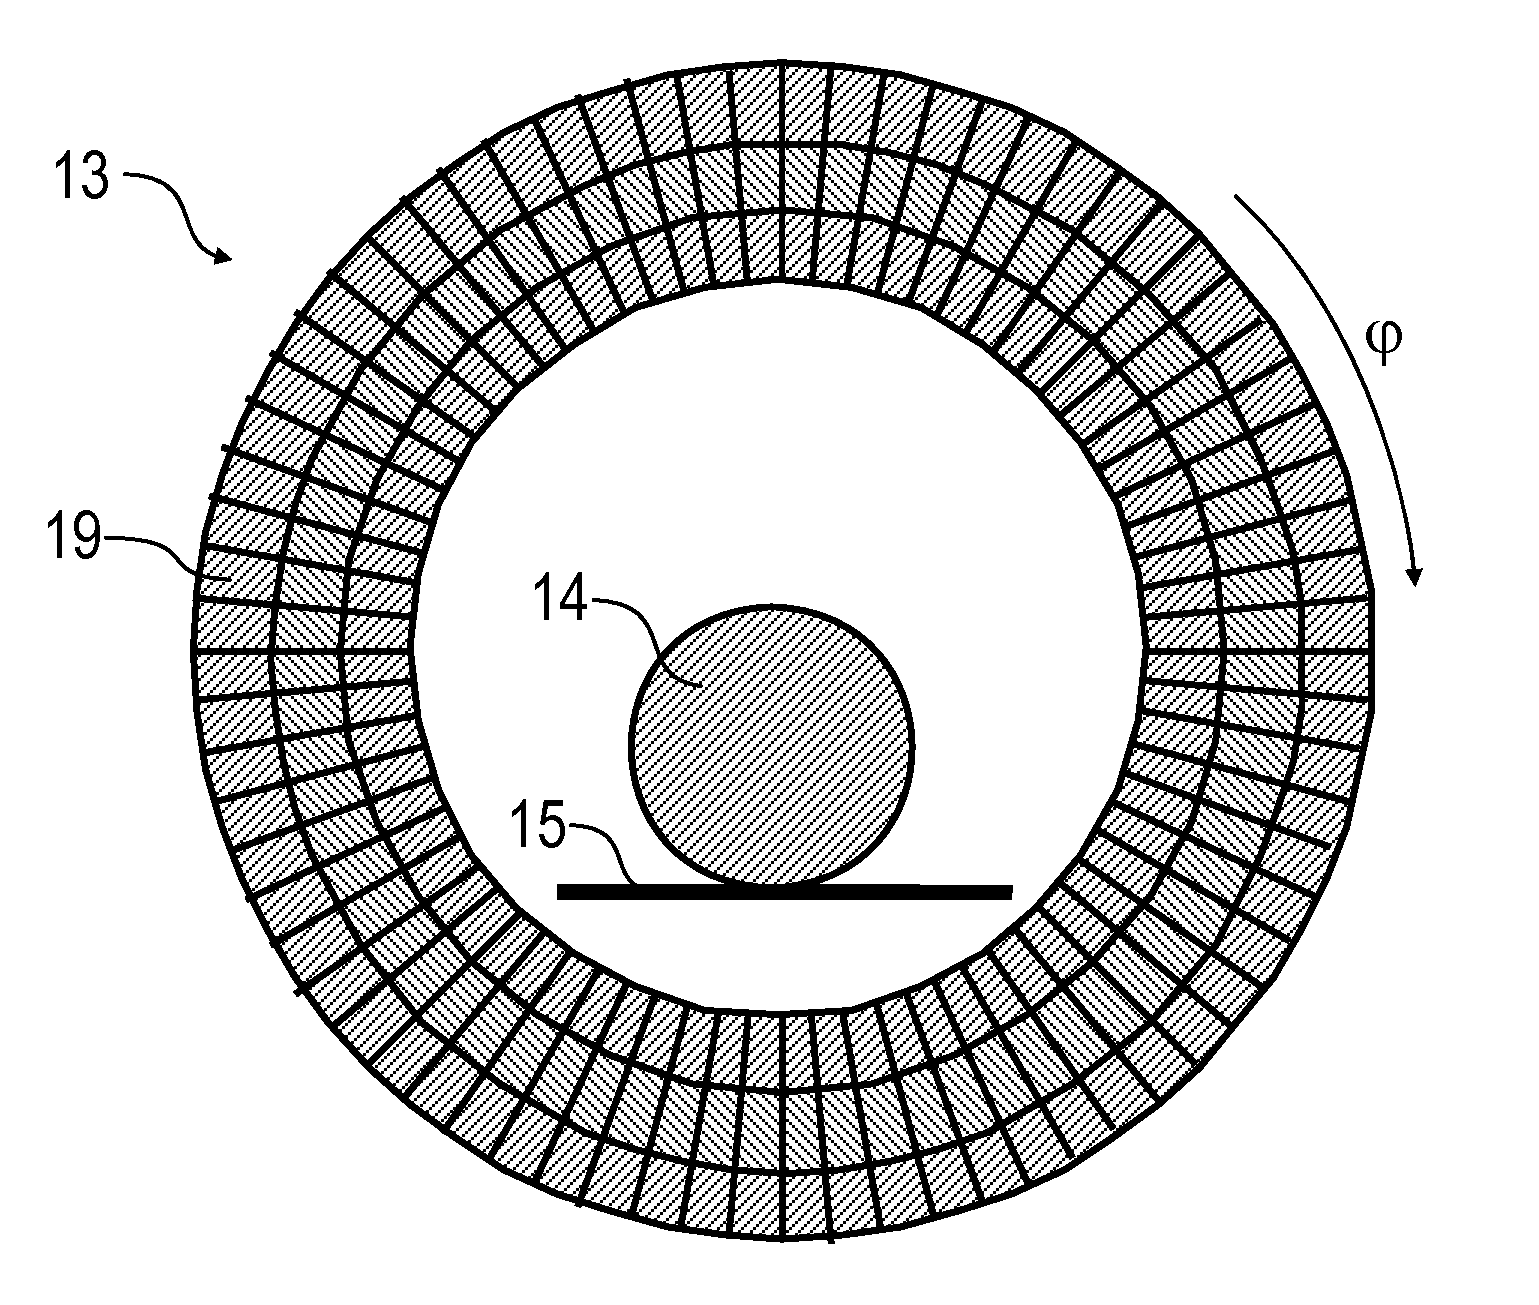 Detector arrangement for a tomographic imaging apparatus, particularly for a positron emission tomograph